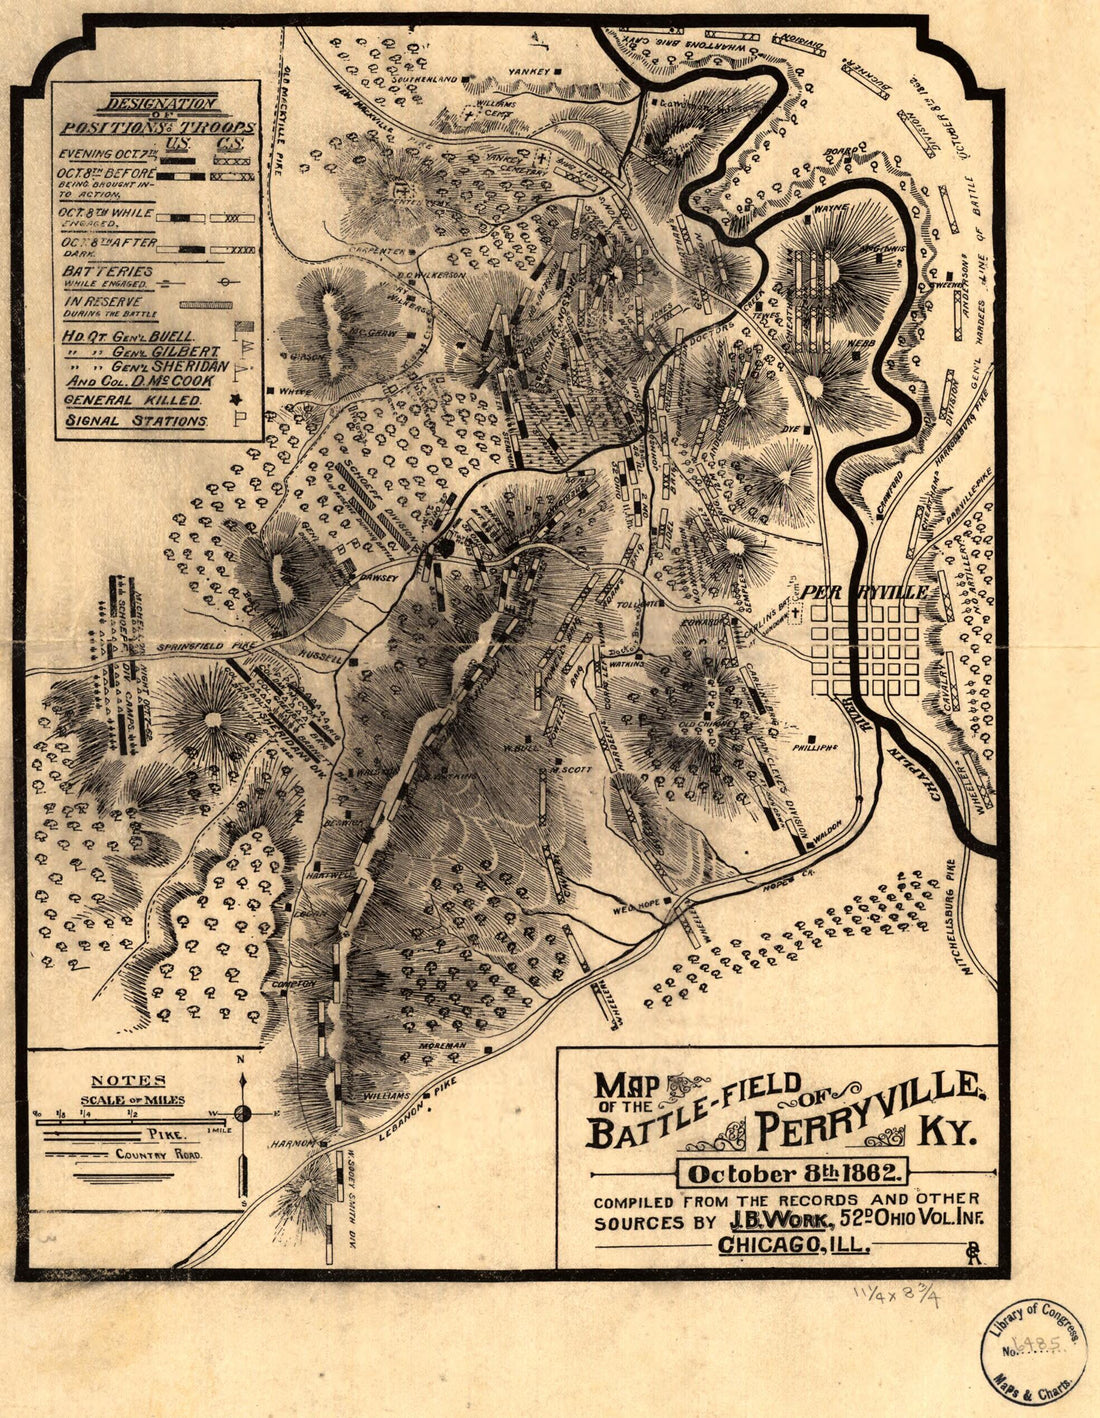 This old map of Field of Perryville, Ky., October 8th 1862 from 1900 was created by J. B. Work in 1900